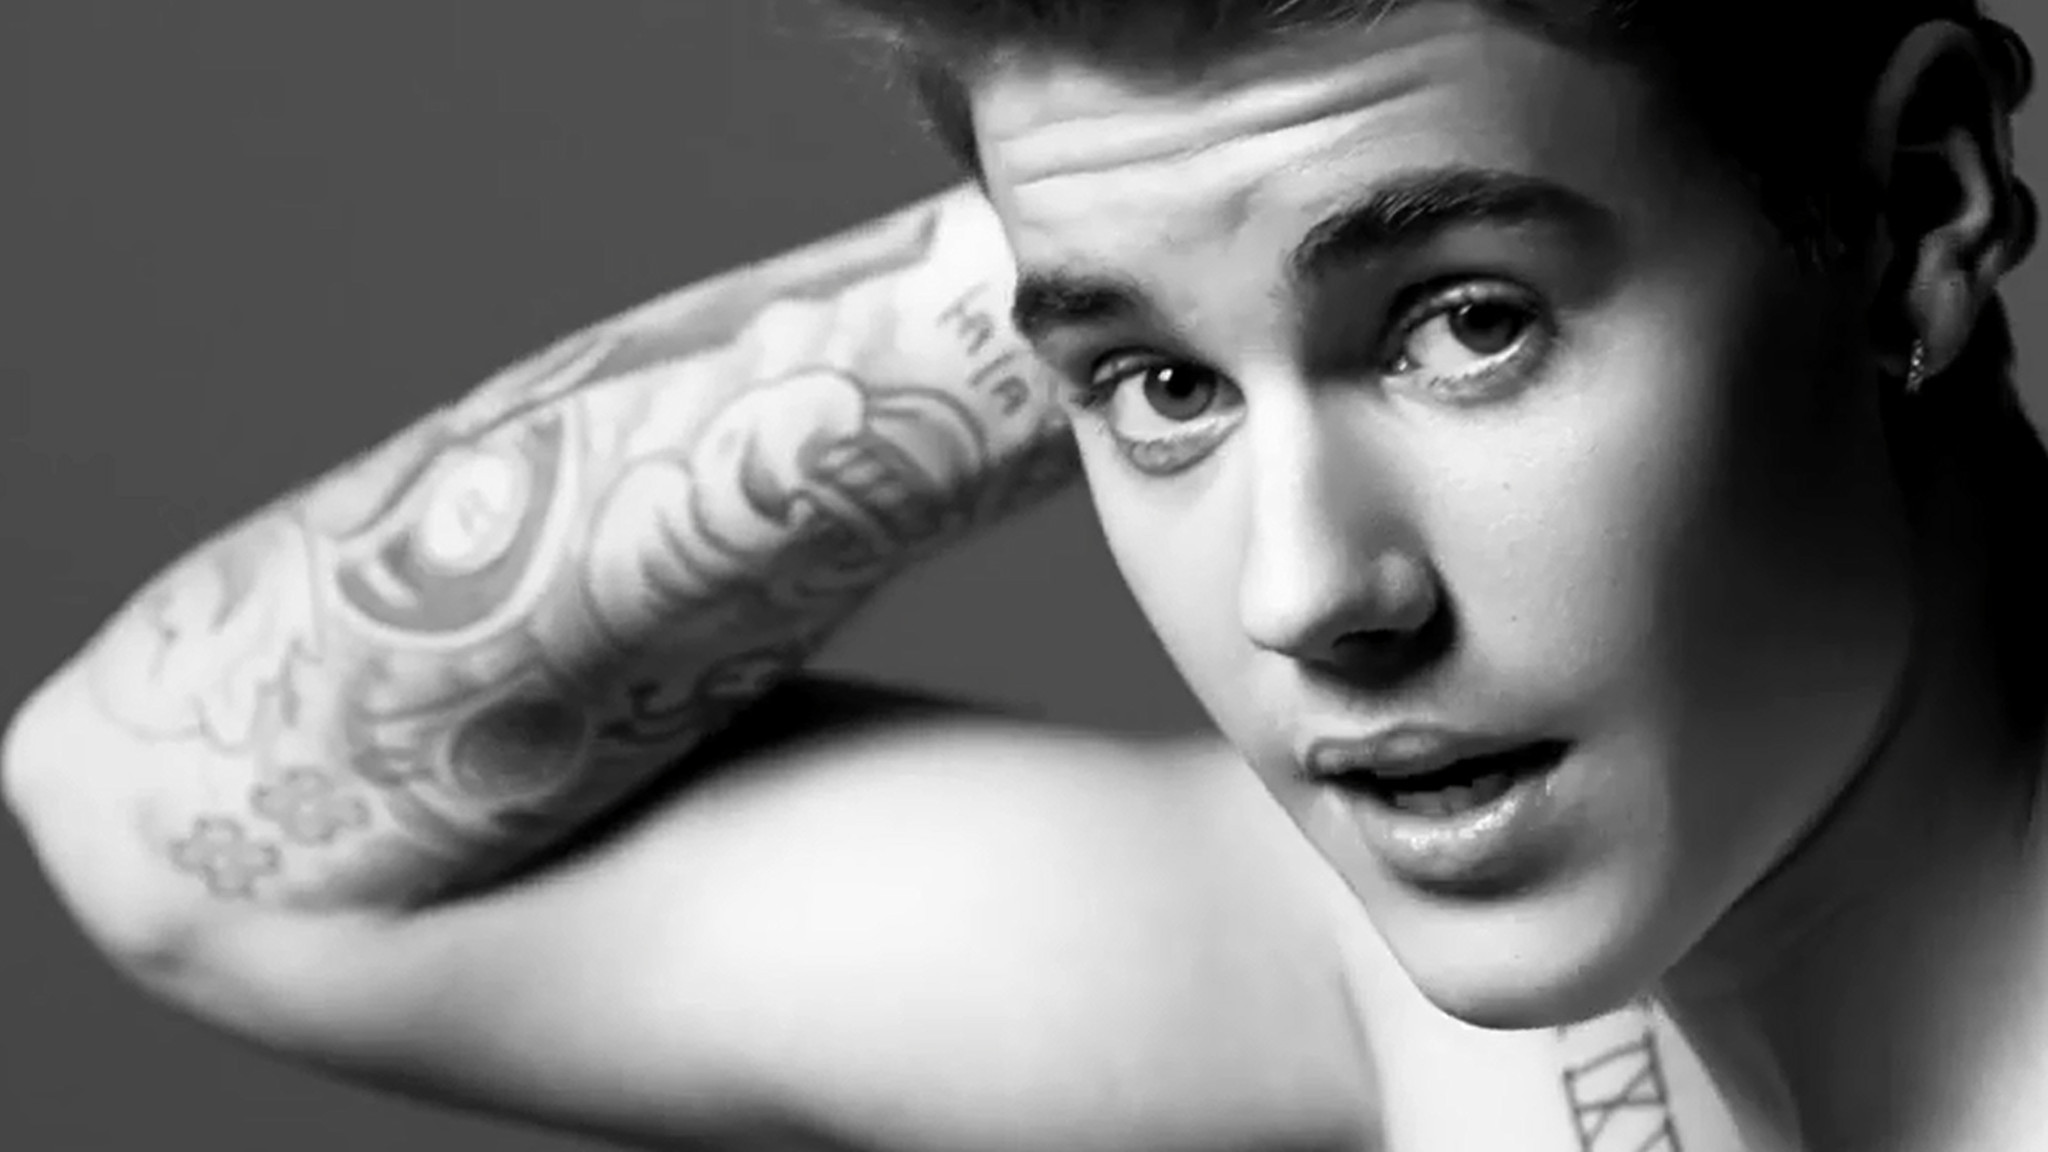  2015 By Stephen Comments Off on Justin Bieber Wallpapers 2015